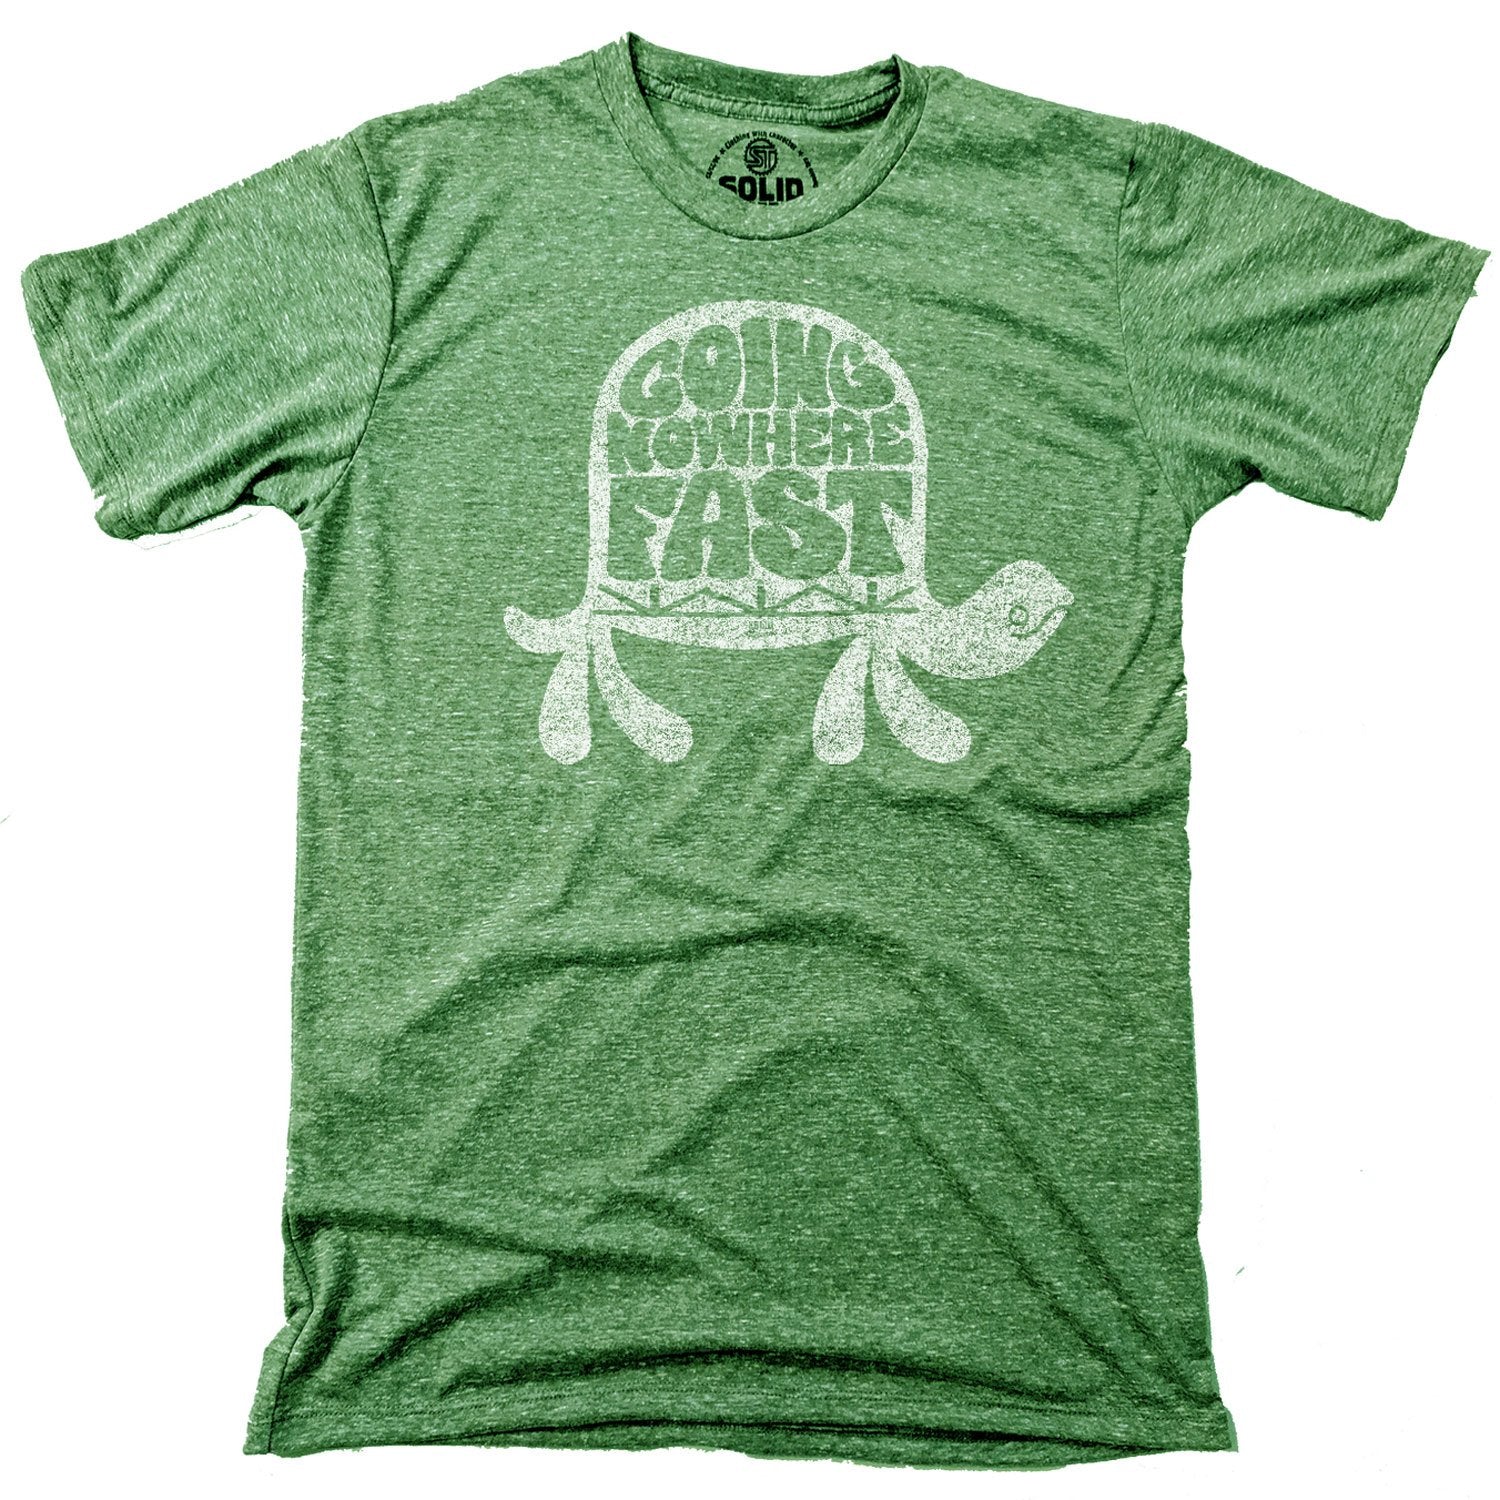 Men's Going Nowhere Fast Vintage Inspired T-shirt | Funny Turtle Graphic Tee | Solid Threads